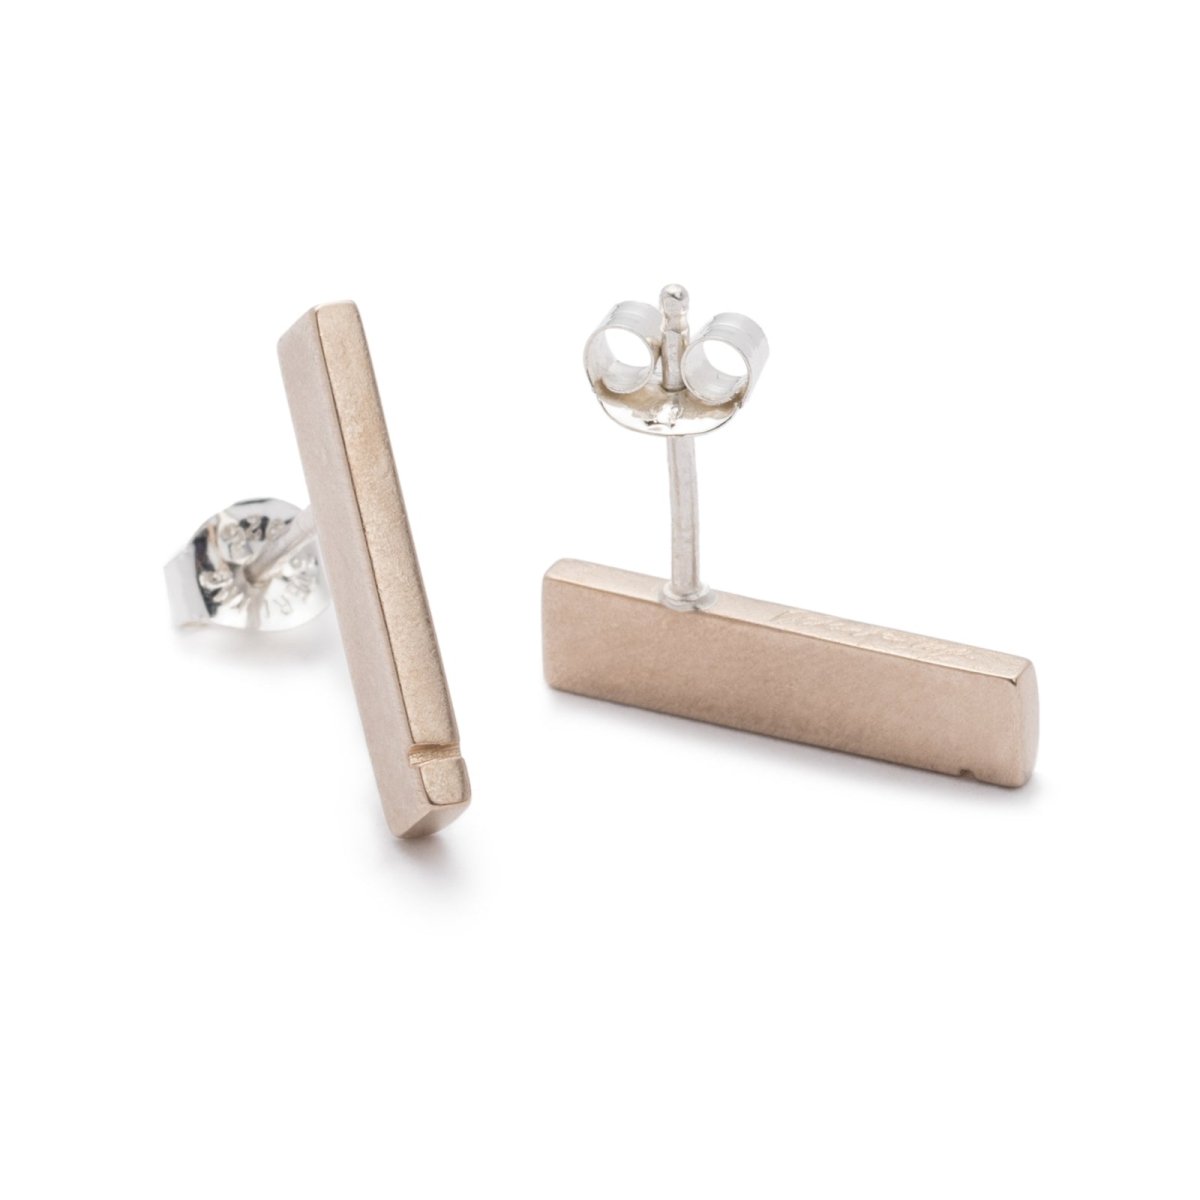 Slim, rectangular bronze bars with a notch detail at one end, soldered to sterling silver earring posts, and finished with sterling silver butterfly earring backings. Hand-crafted in Portland, Oregon. 